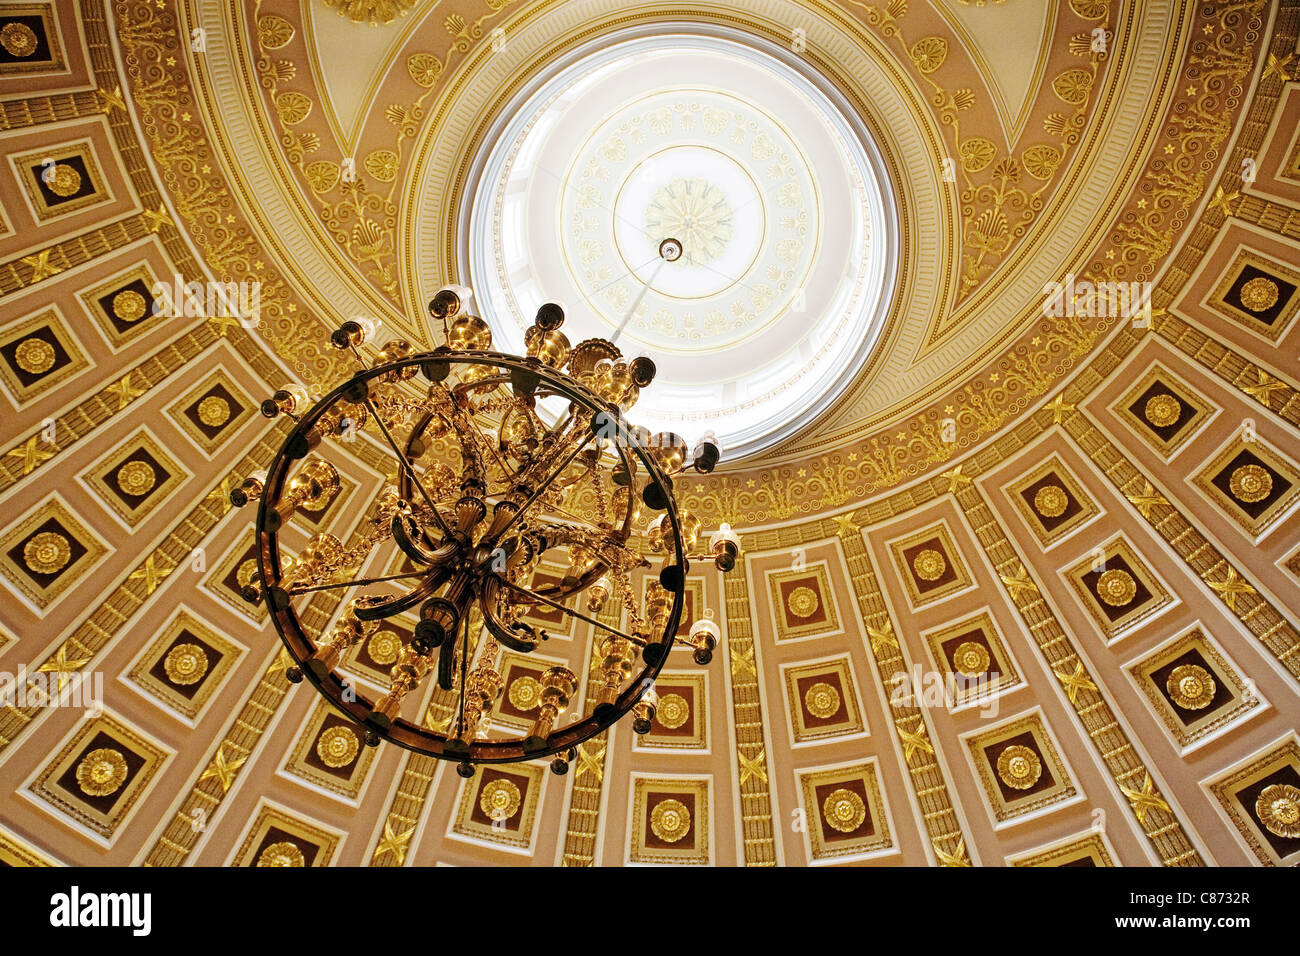 The chandelier and roof, National Statuary Hall, the Capitol building, Washington DC USA Stock Photo